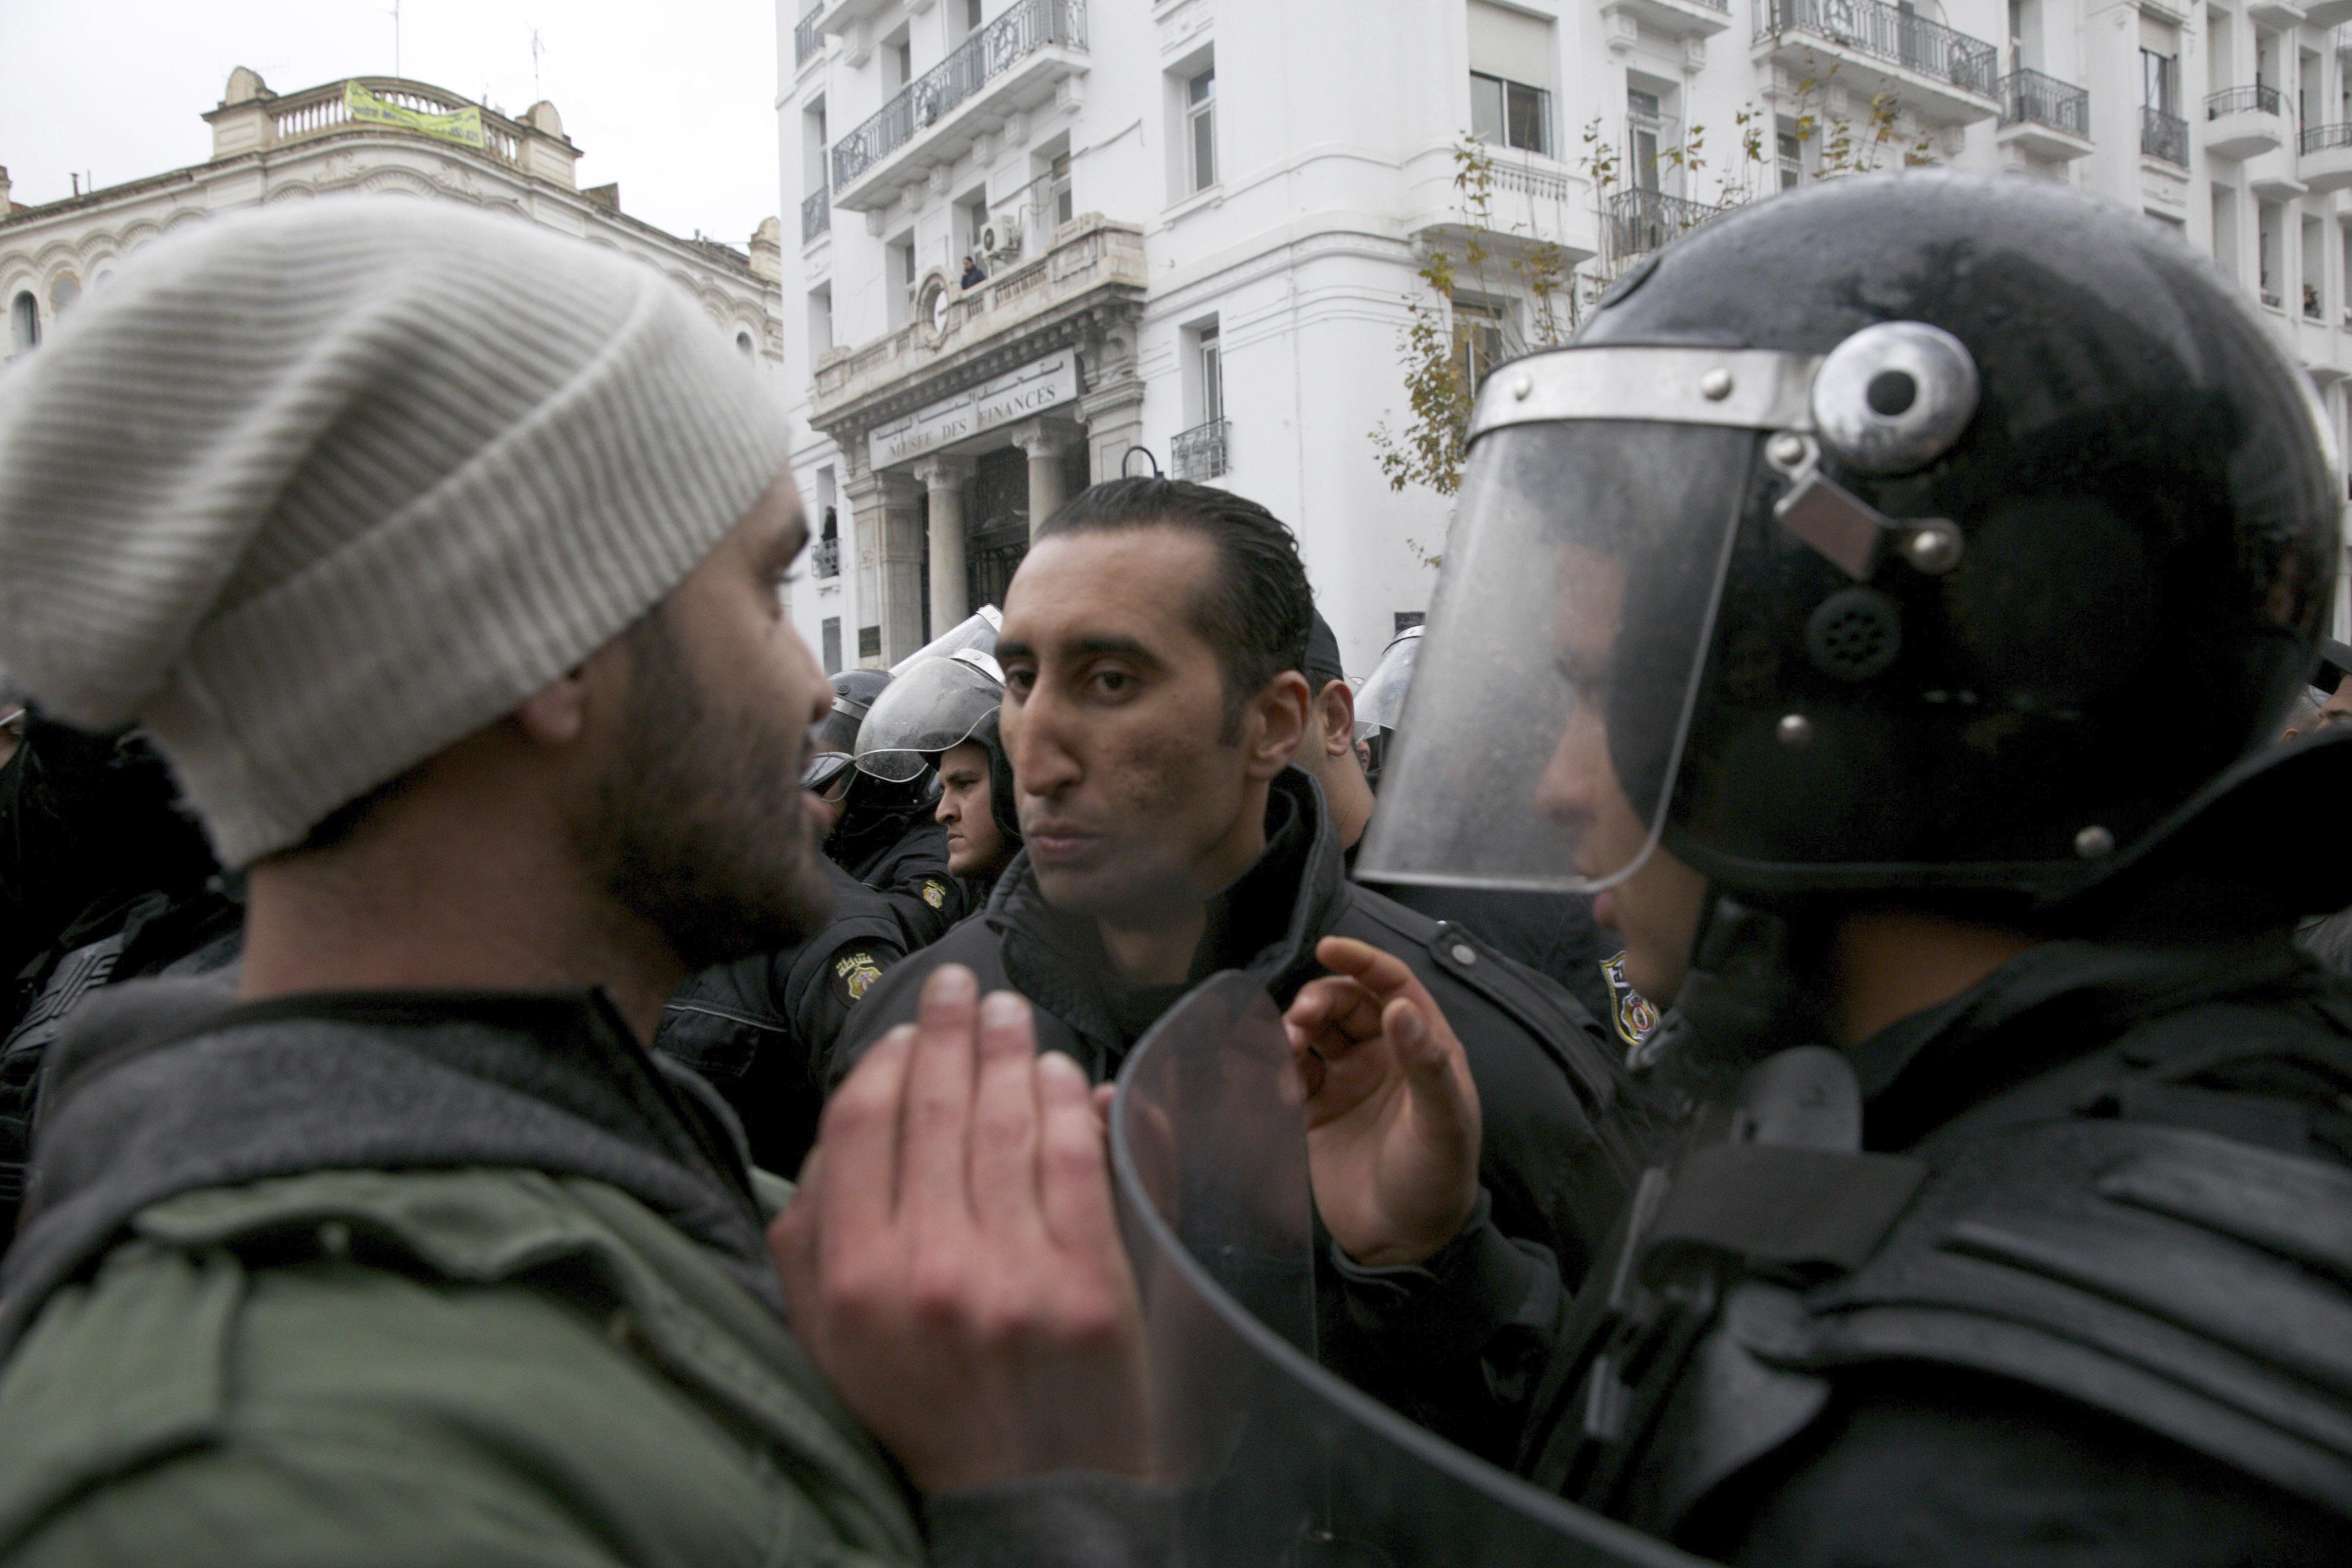 Protestors face riot police during a demonstration in Tunis, Tunisia, Friday Jan. 12, 2018. Tunisia's government says protests appear to be subsiding after anger over food prices led to days of clashes with police that left one dead, dozens injured and widespread damage. (AP Photo/Hassene Dridi)